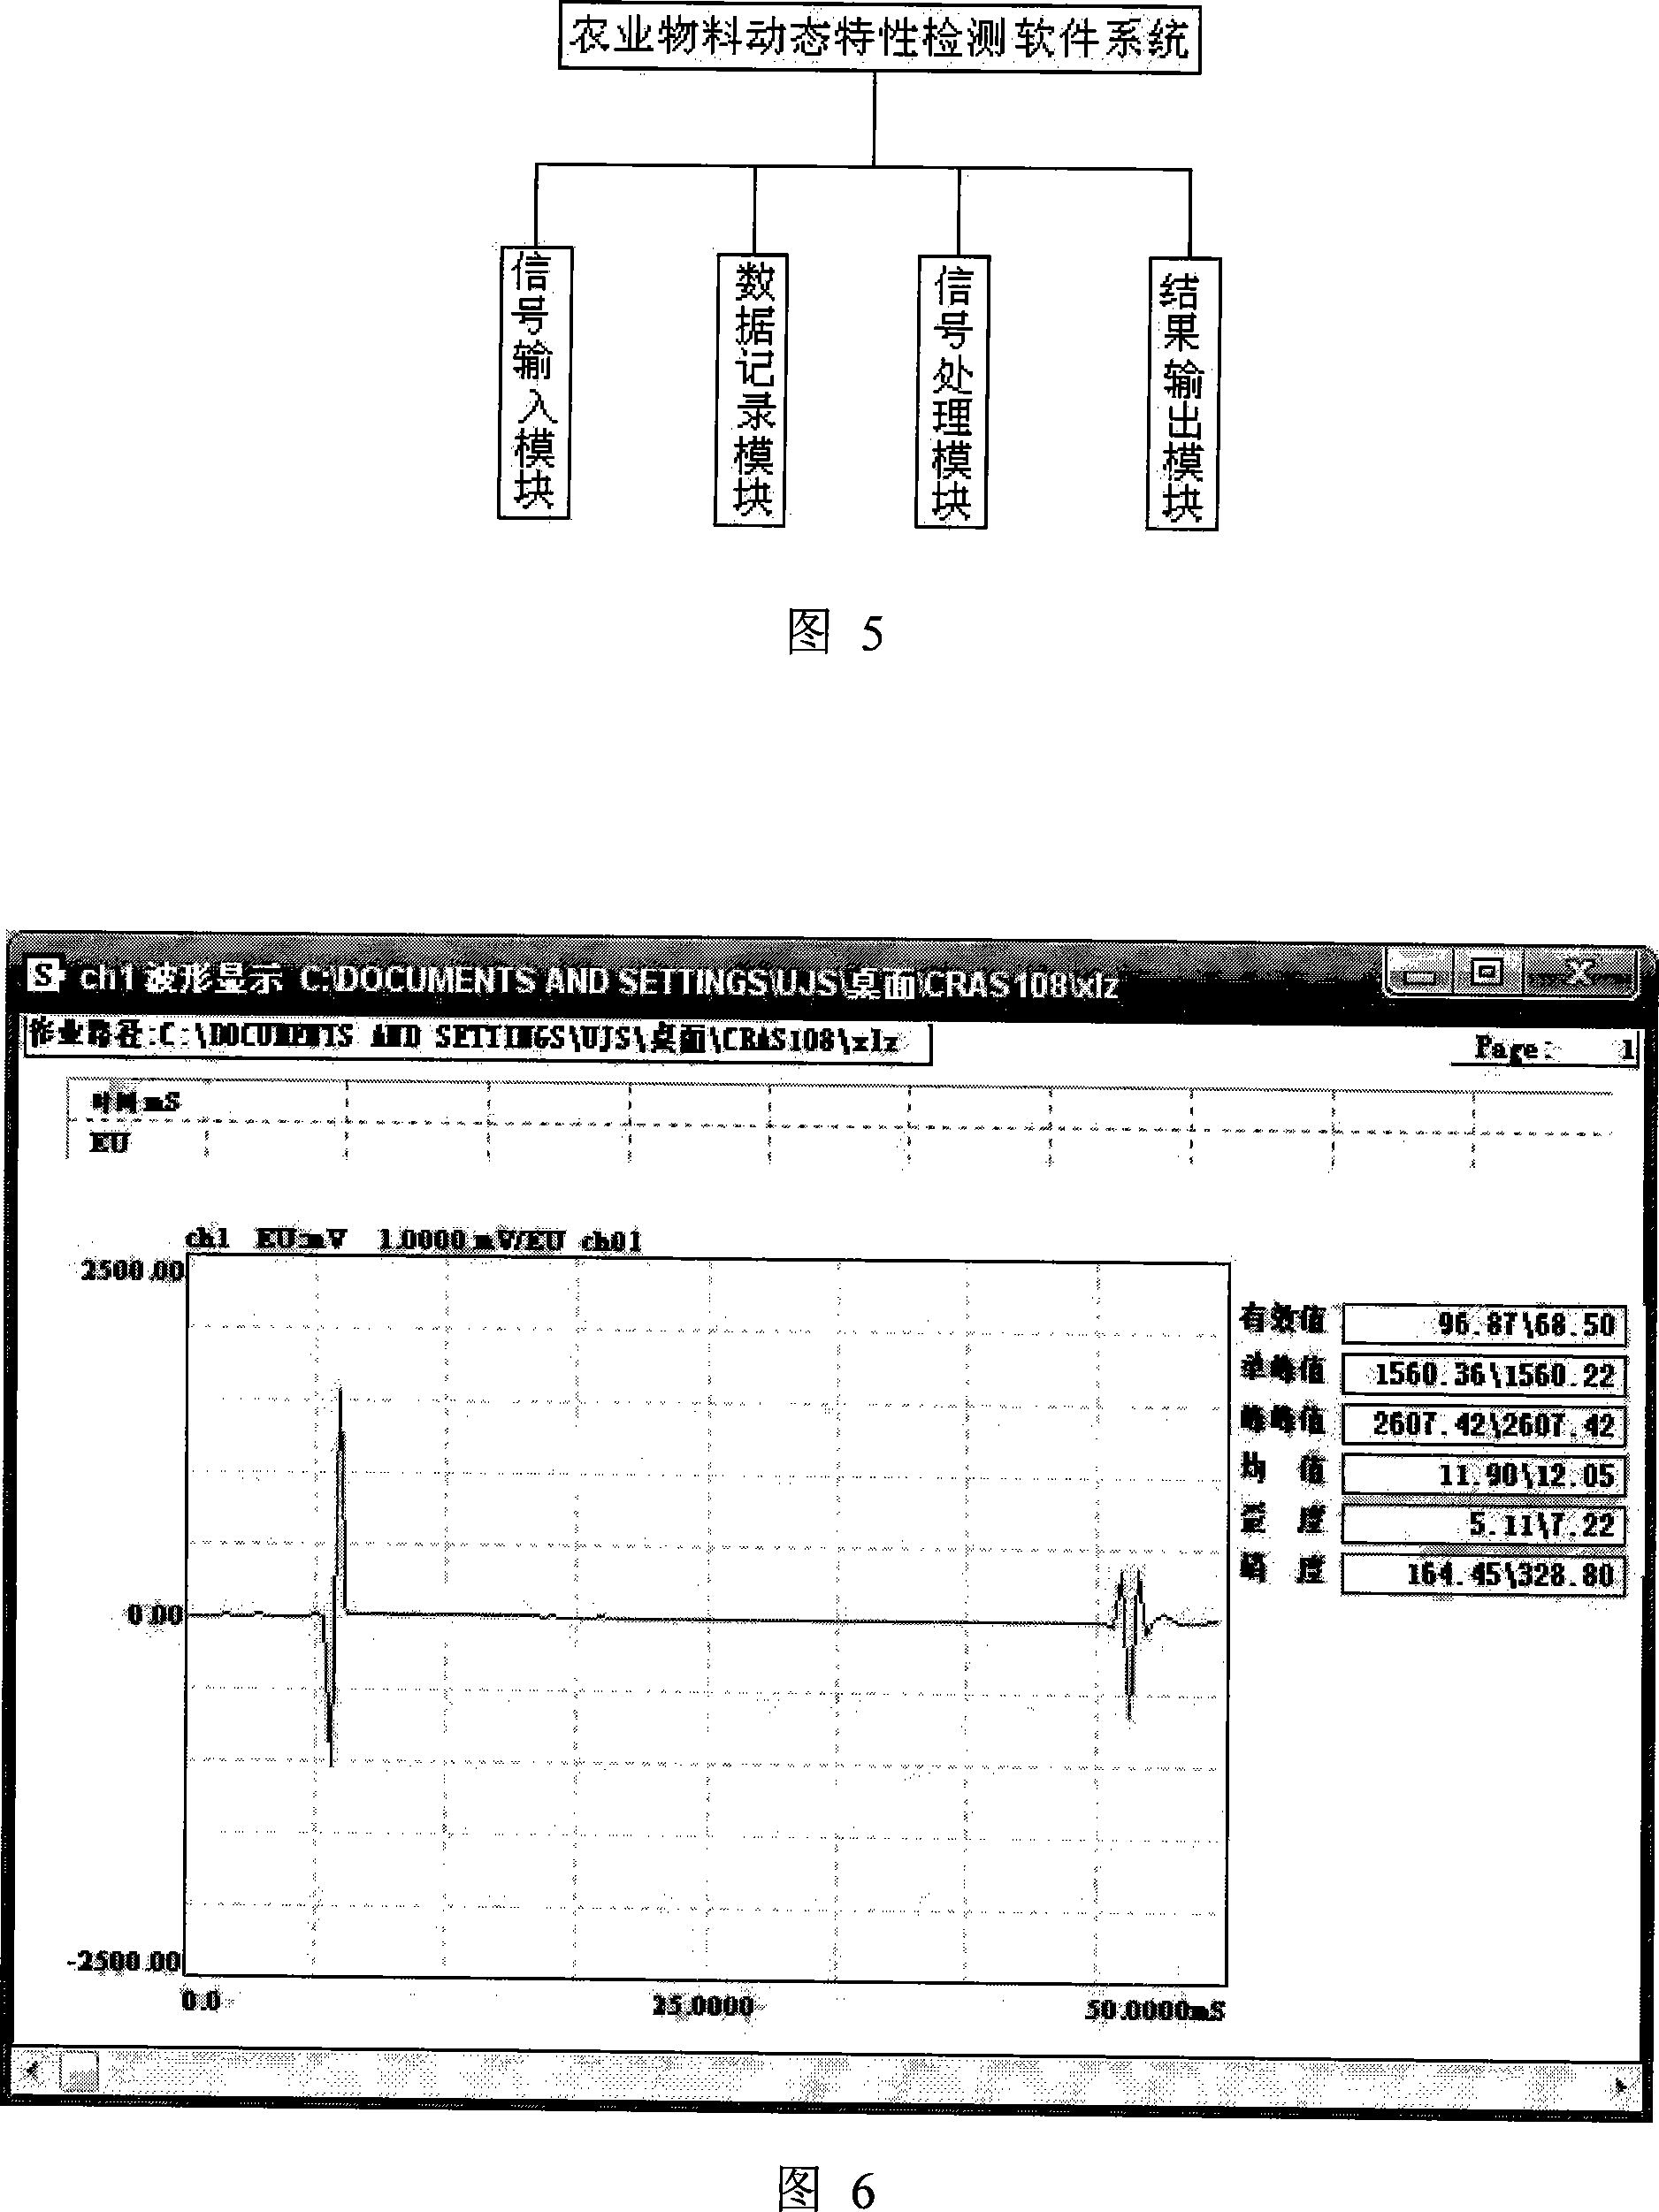 Agricultural material impacting characteristic test apparatus and method